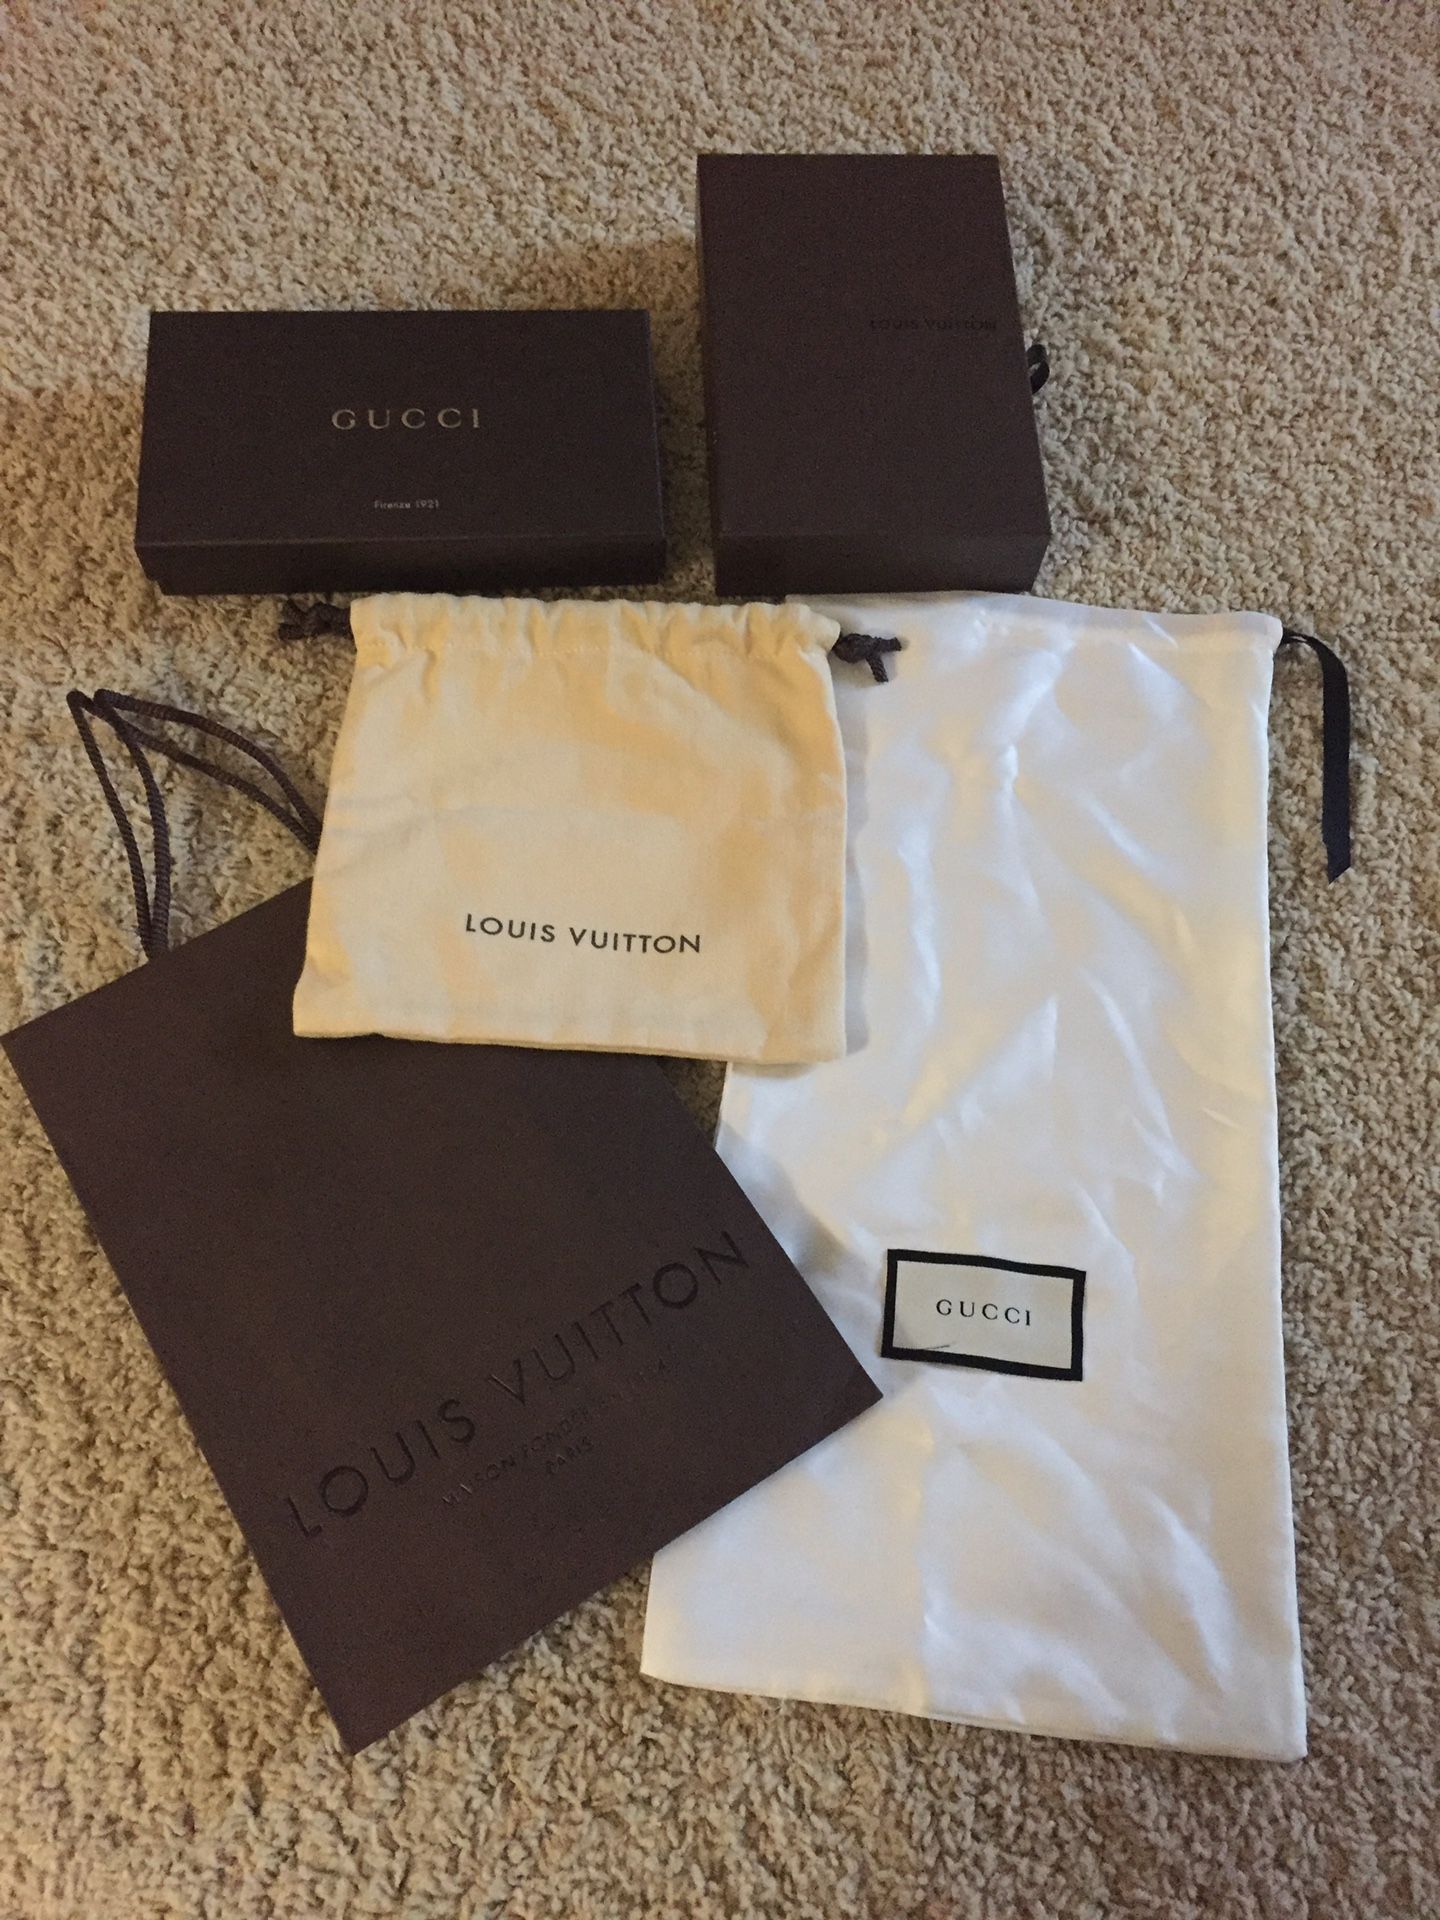 Gucci and LV Boxed/Bags